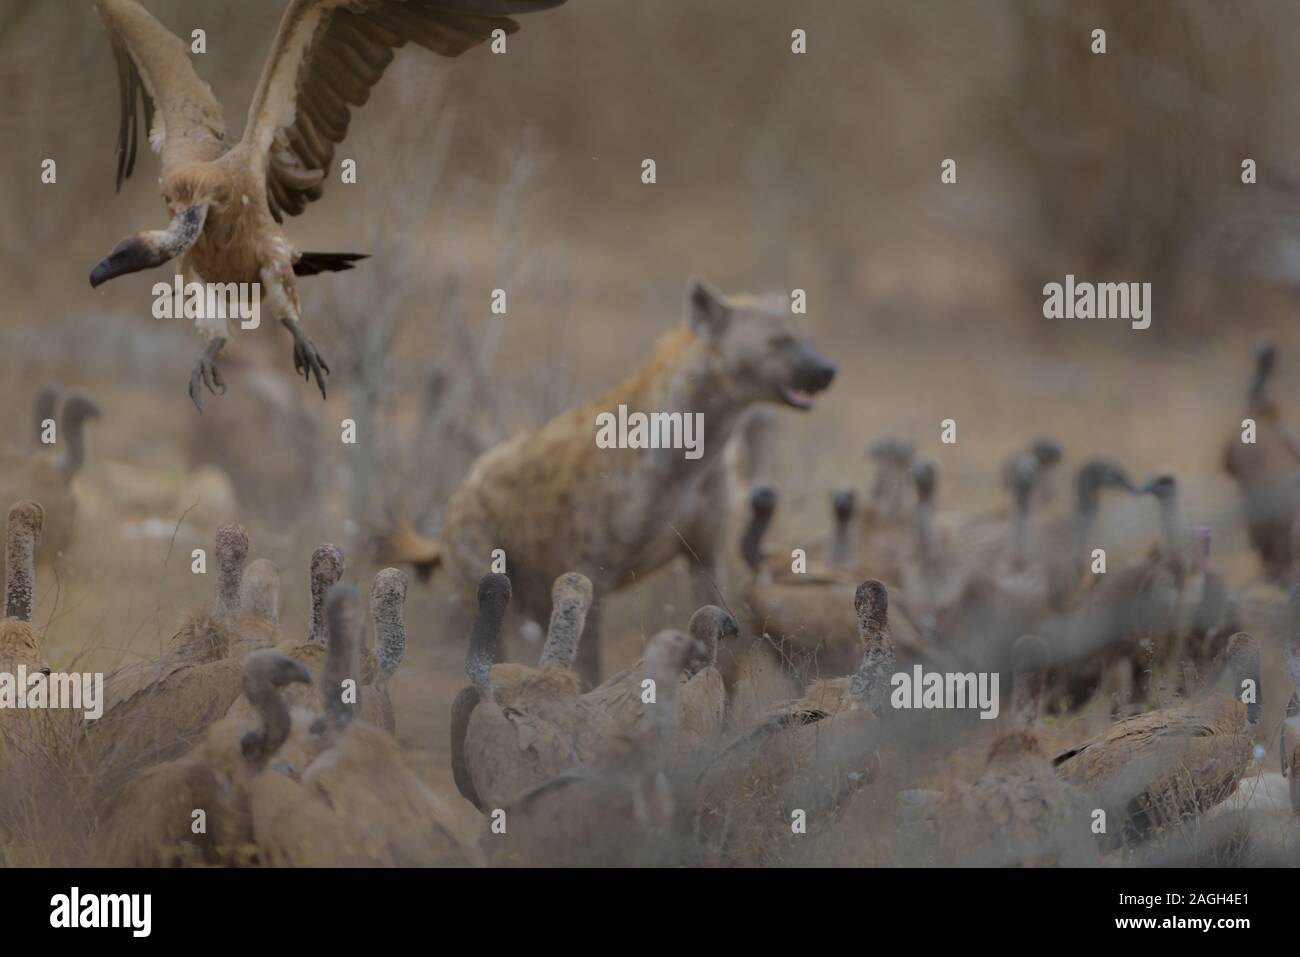 Vulture flying with a blurred hyena in the background Stock Photo